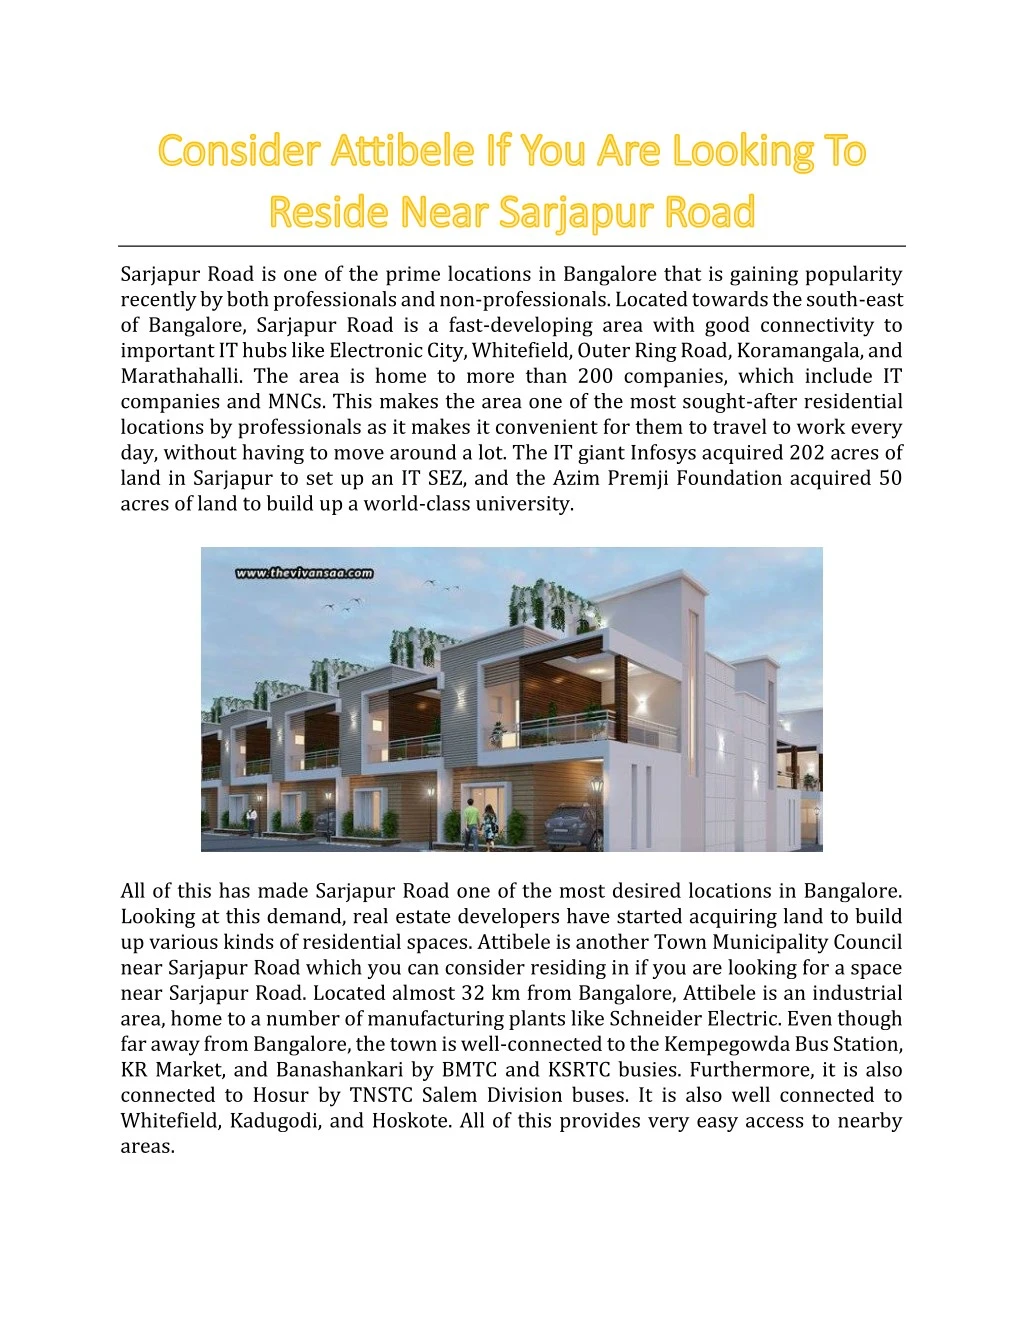 sarjapur road is one of the prime locations